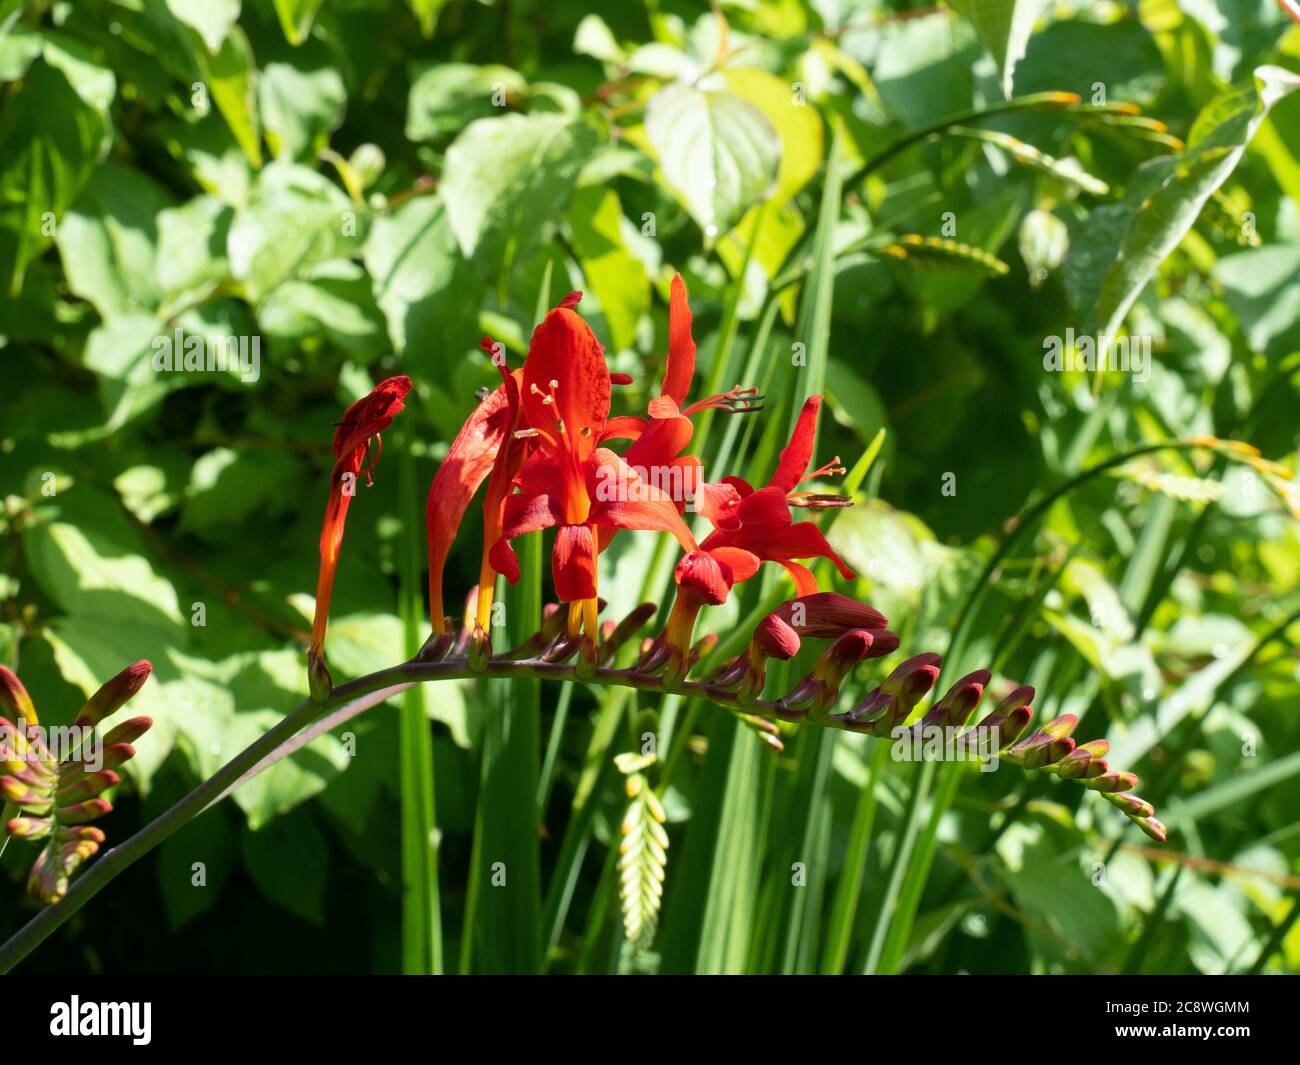 A single flower spike of the deep red Crocosmia Lucifer against a green foliage background Stock Photo